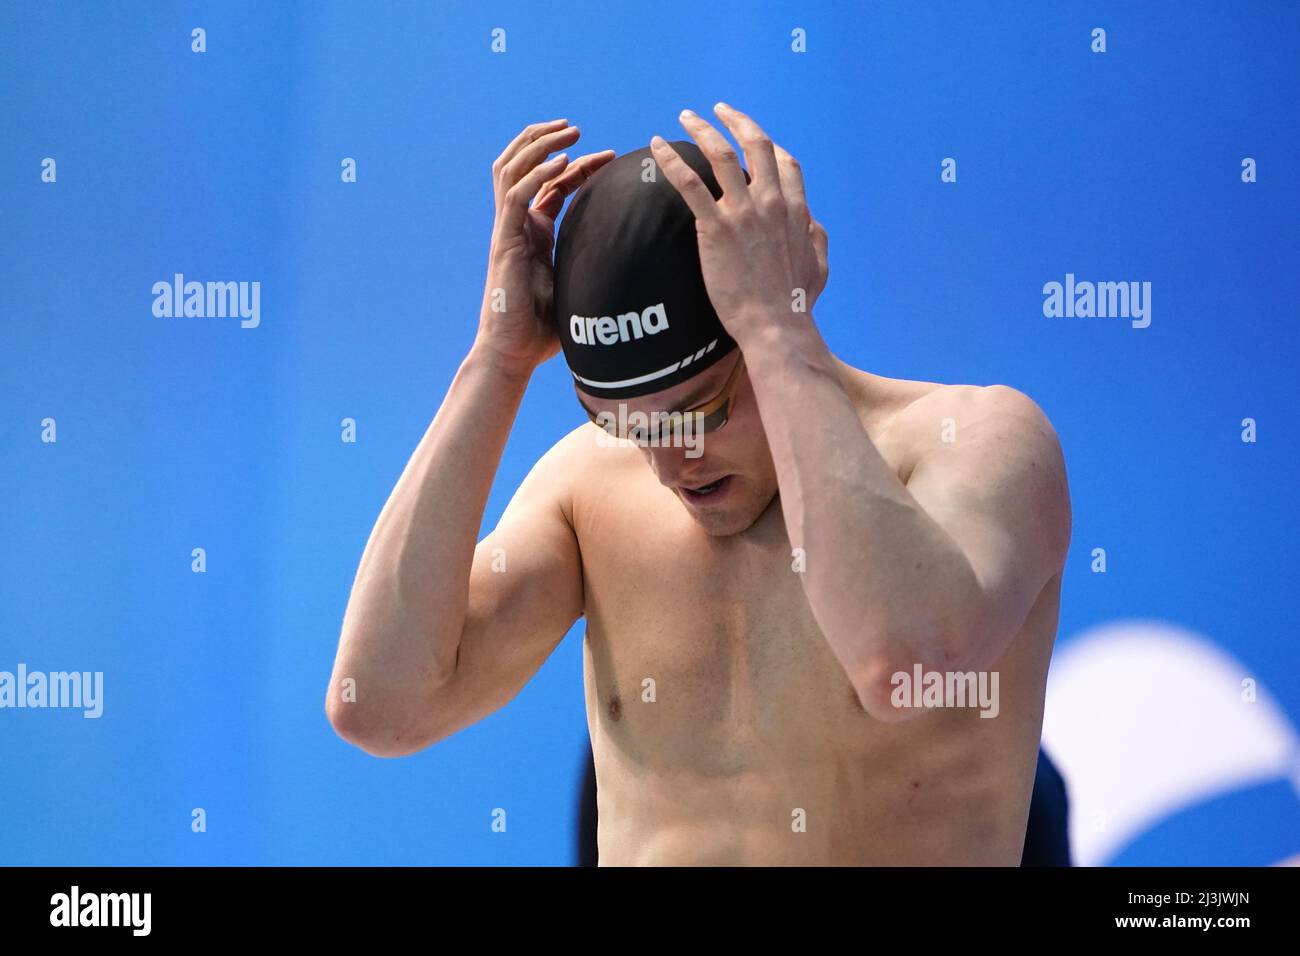 Loughborough NC's James Wilby in action during the Men's Open 200m Breaststroke final on day four of the 2022 British Swimming Championships at Ponds Forge International Swimming Centre, Sheffield. Picture date: Friday April 8, 2022. Stock Photo